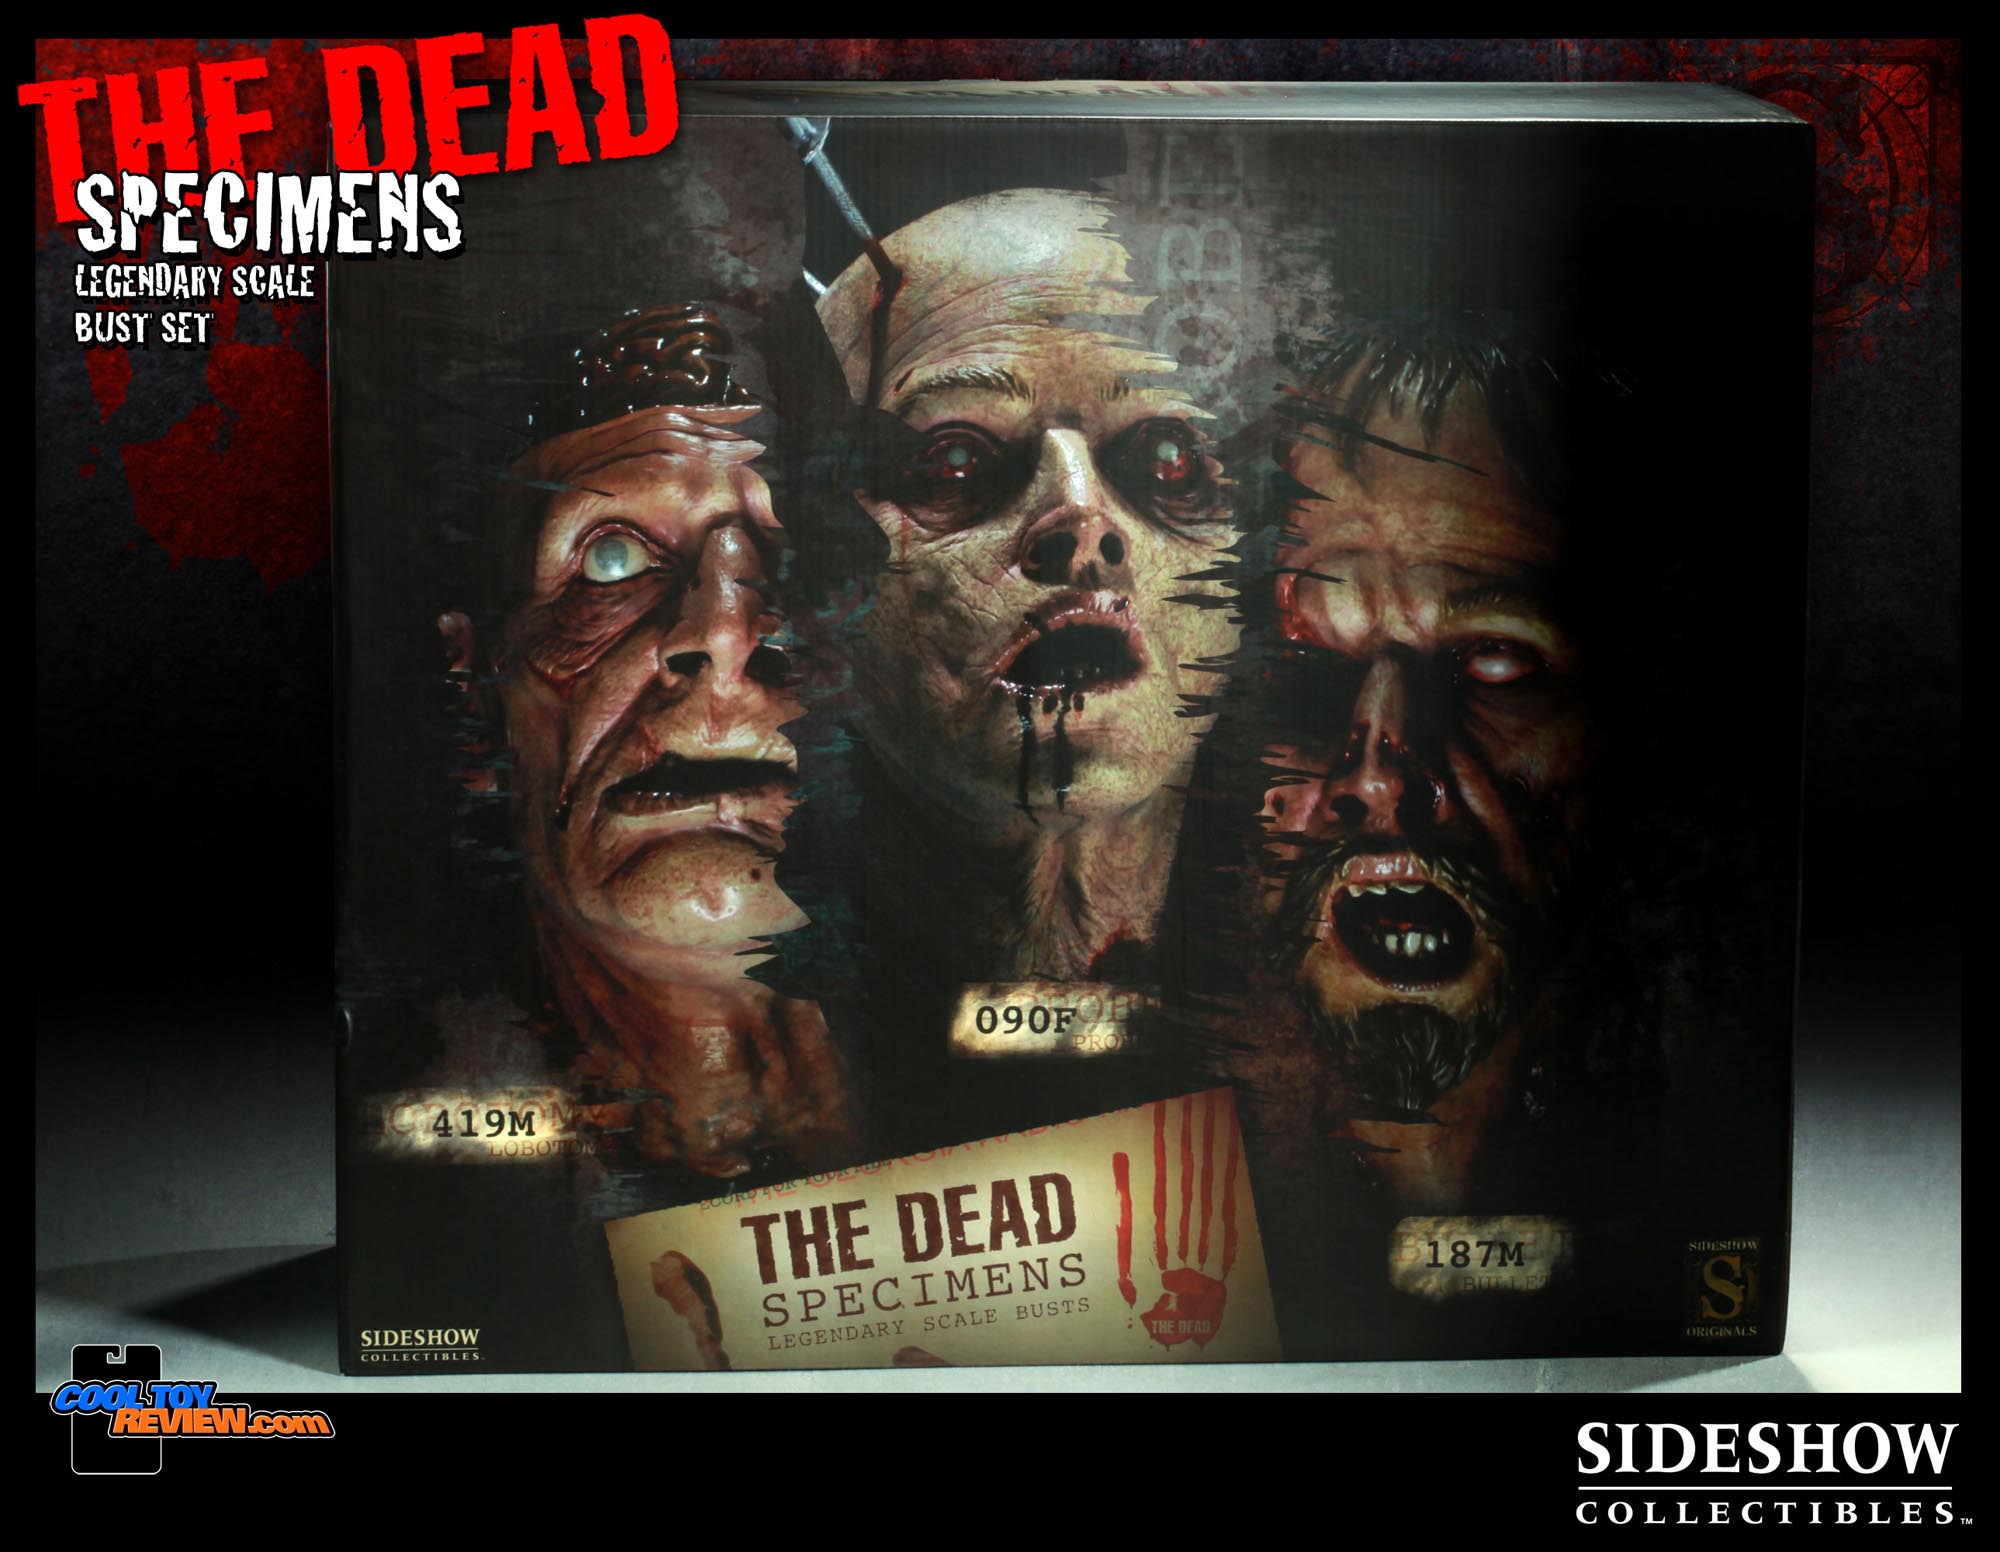 The Dead: Specimens Legendary Scale Busts Set by Sideshow Collectible